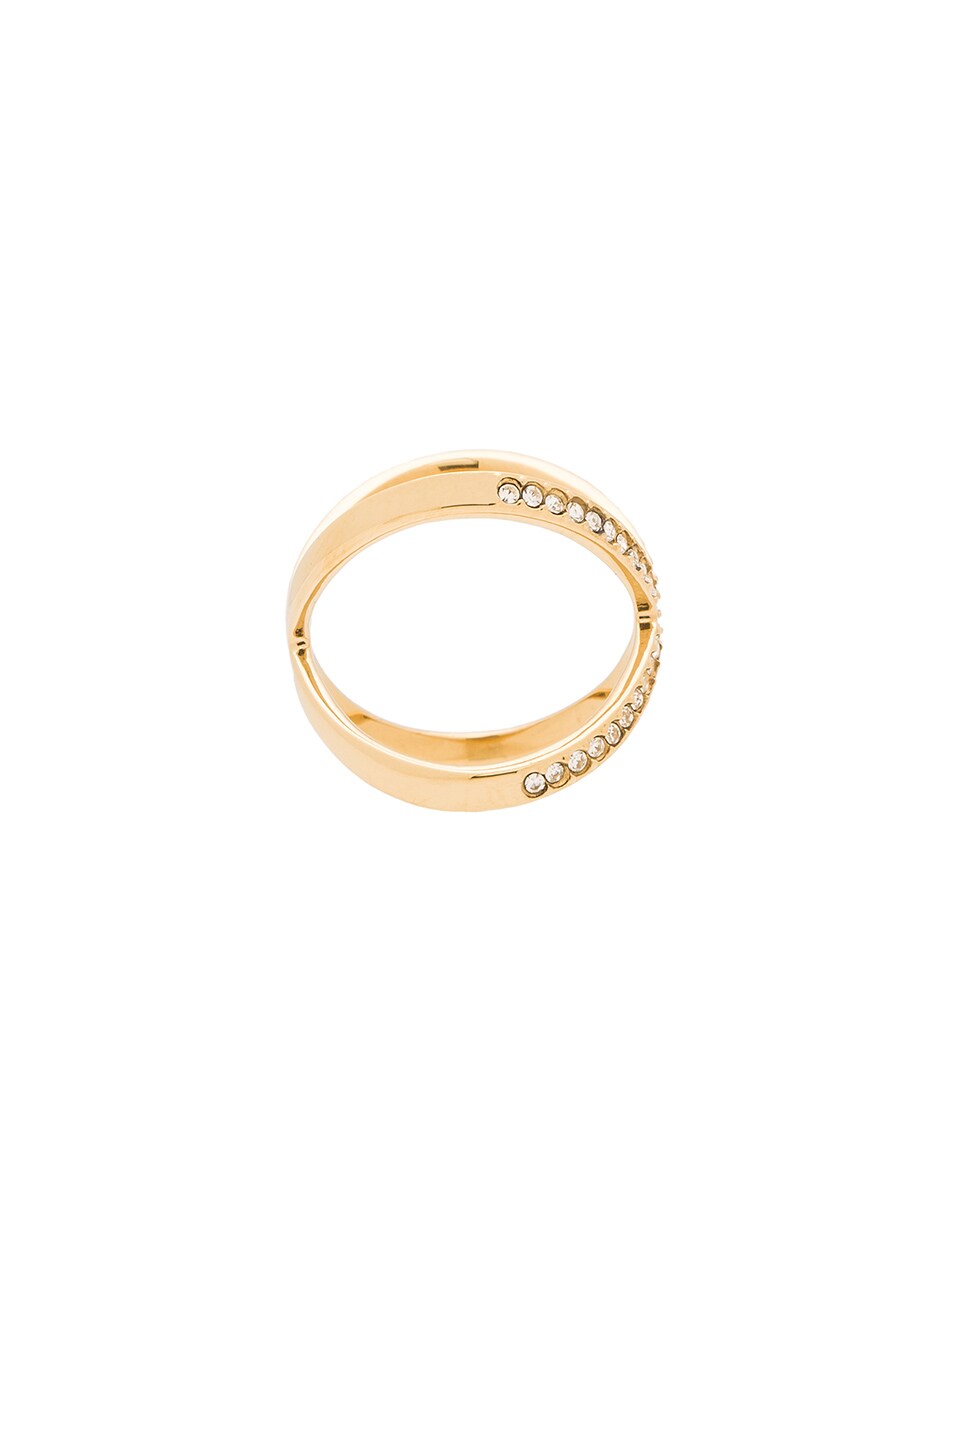 Michael Kors Pave X Ring in Gold